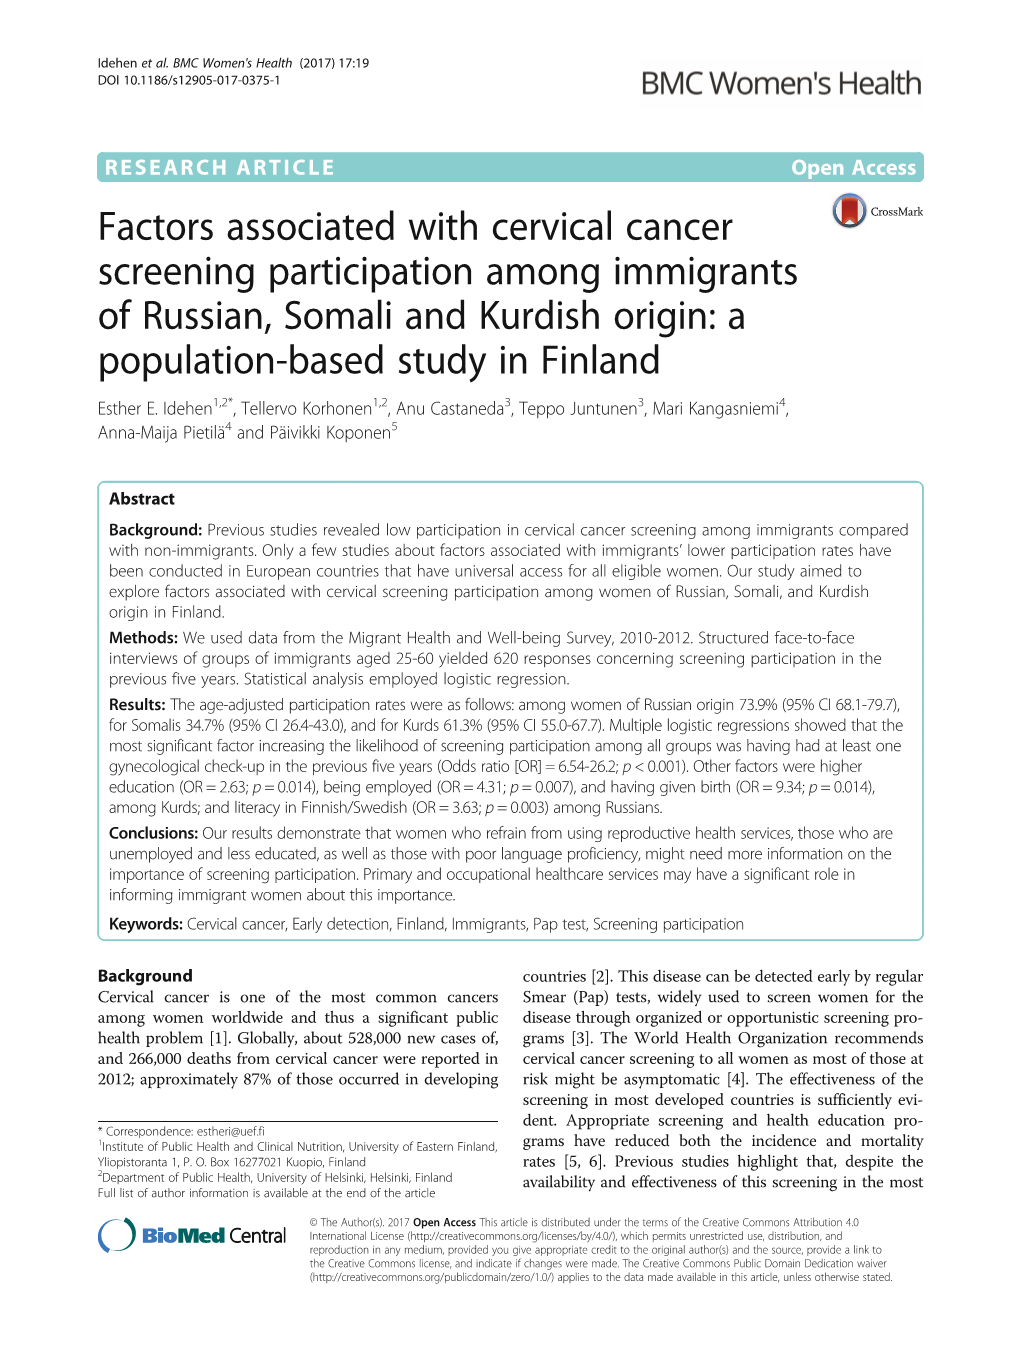 Factors Associated with Cervical Cancer Screening Participation Among Immigrants of Russian, Somali and Kurdish Origin: a Population-Based Study in Finland Esther E